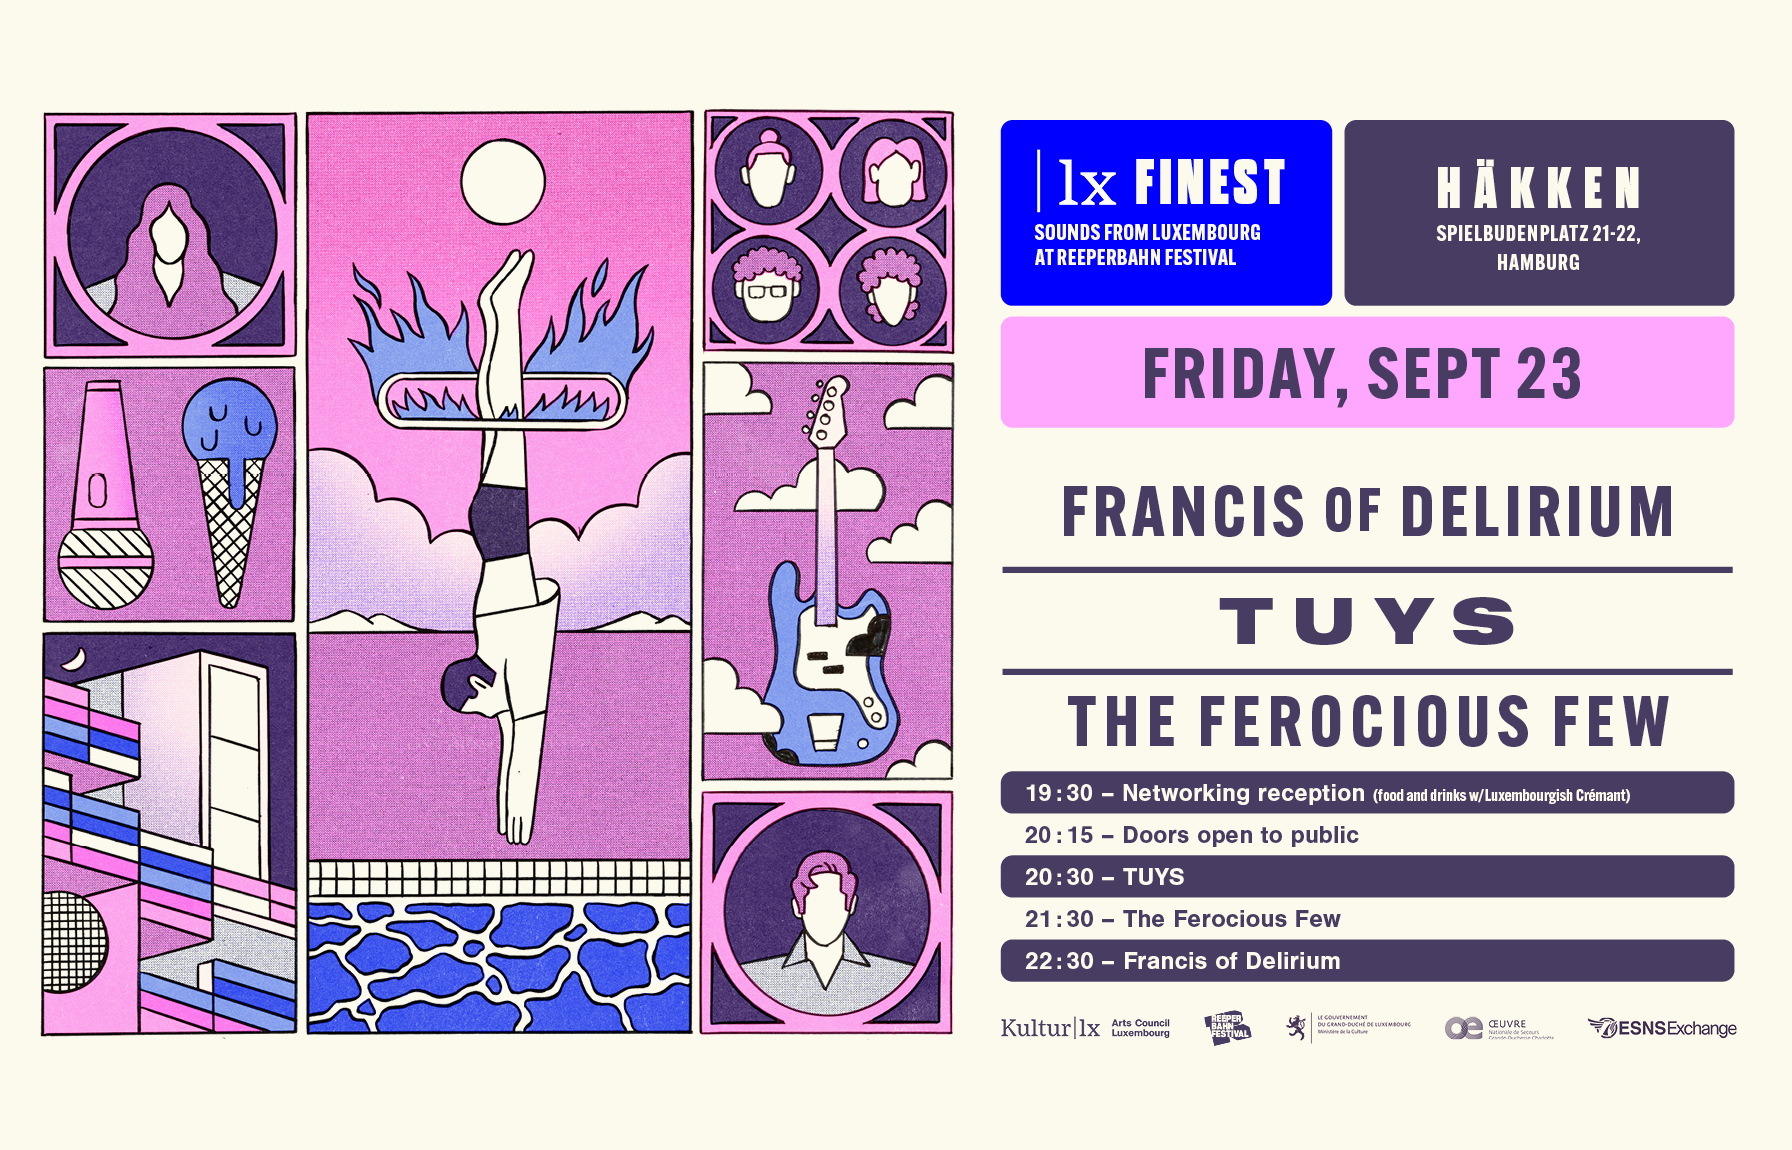 |lx finest - Sounds of Luxembourg beim Reeperbahn Festival 2022